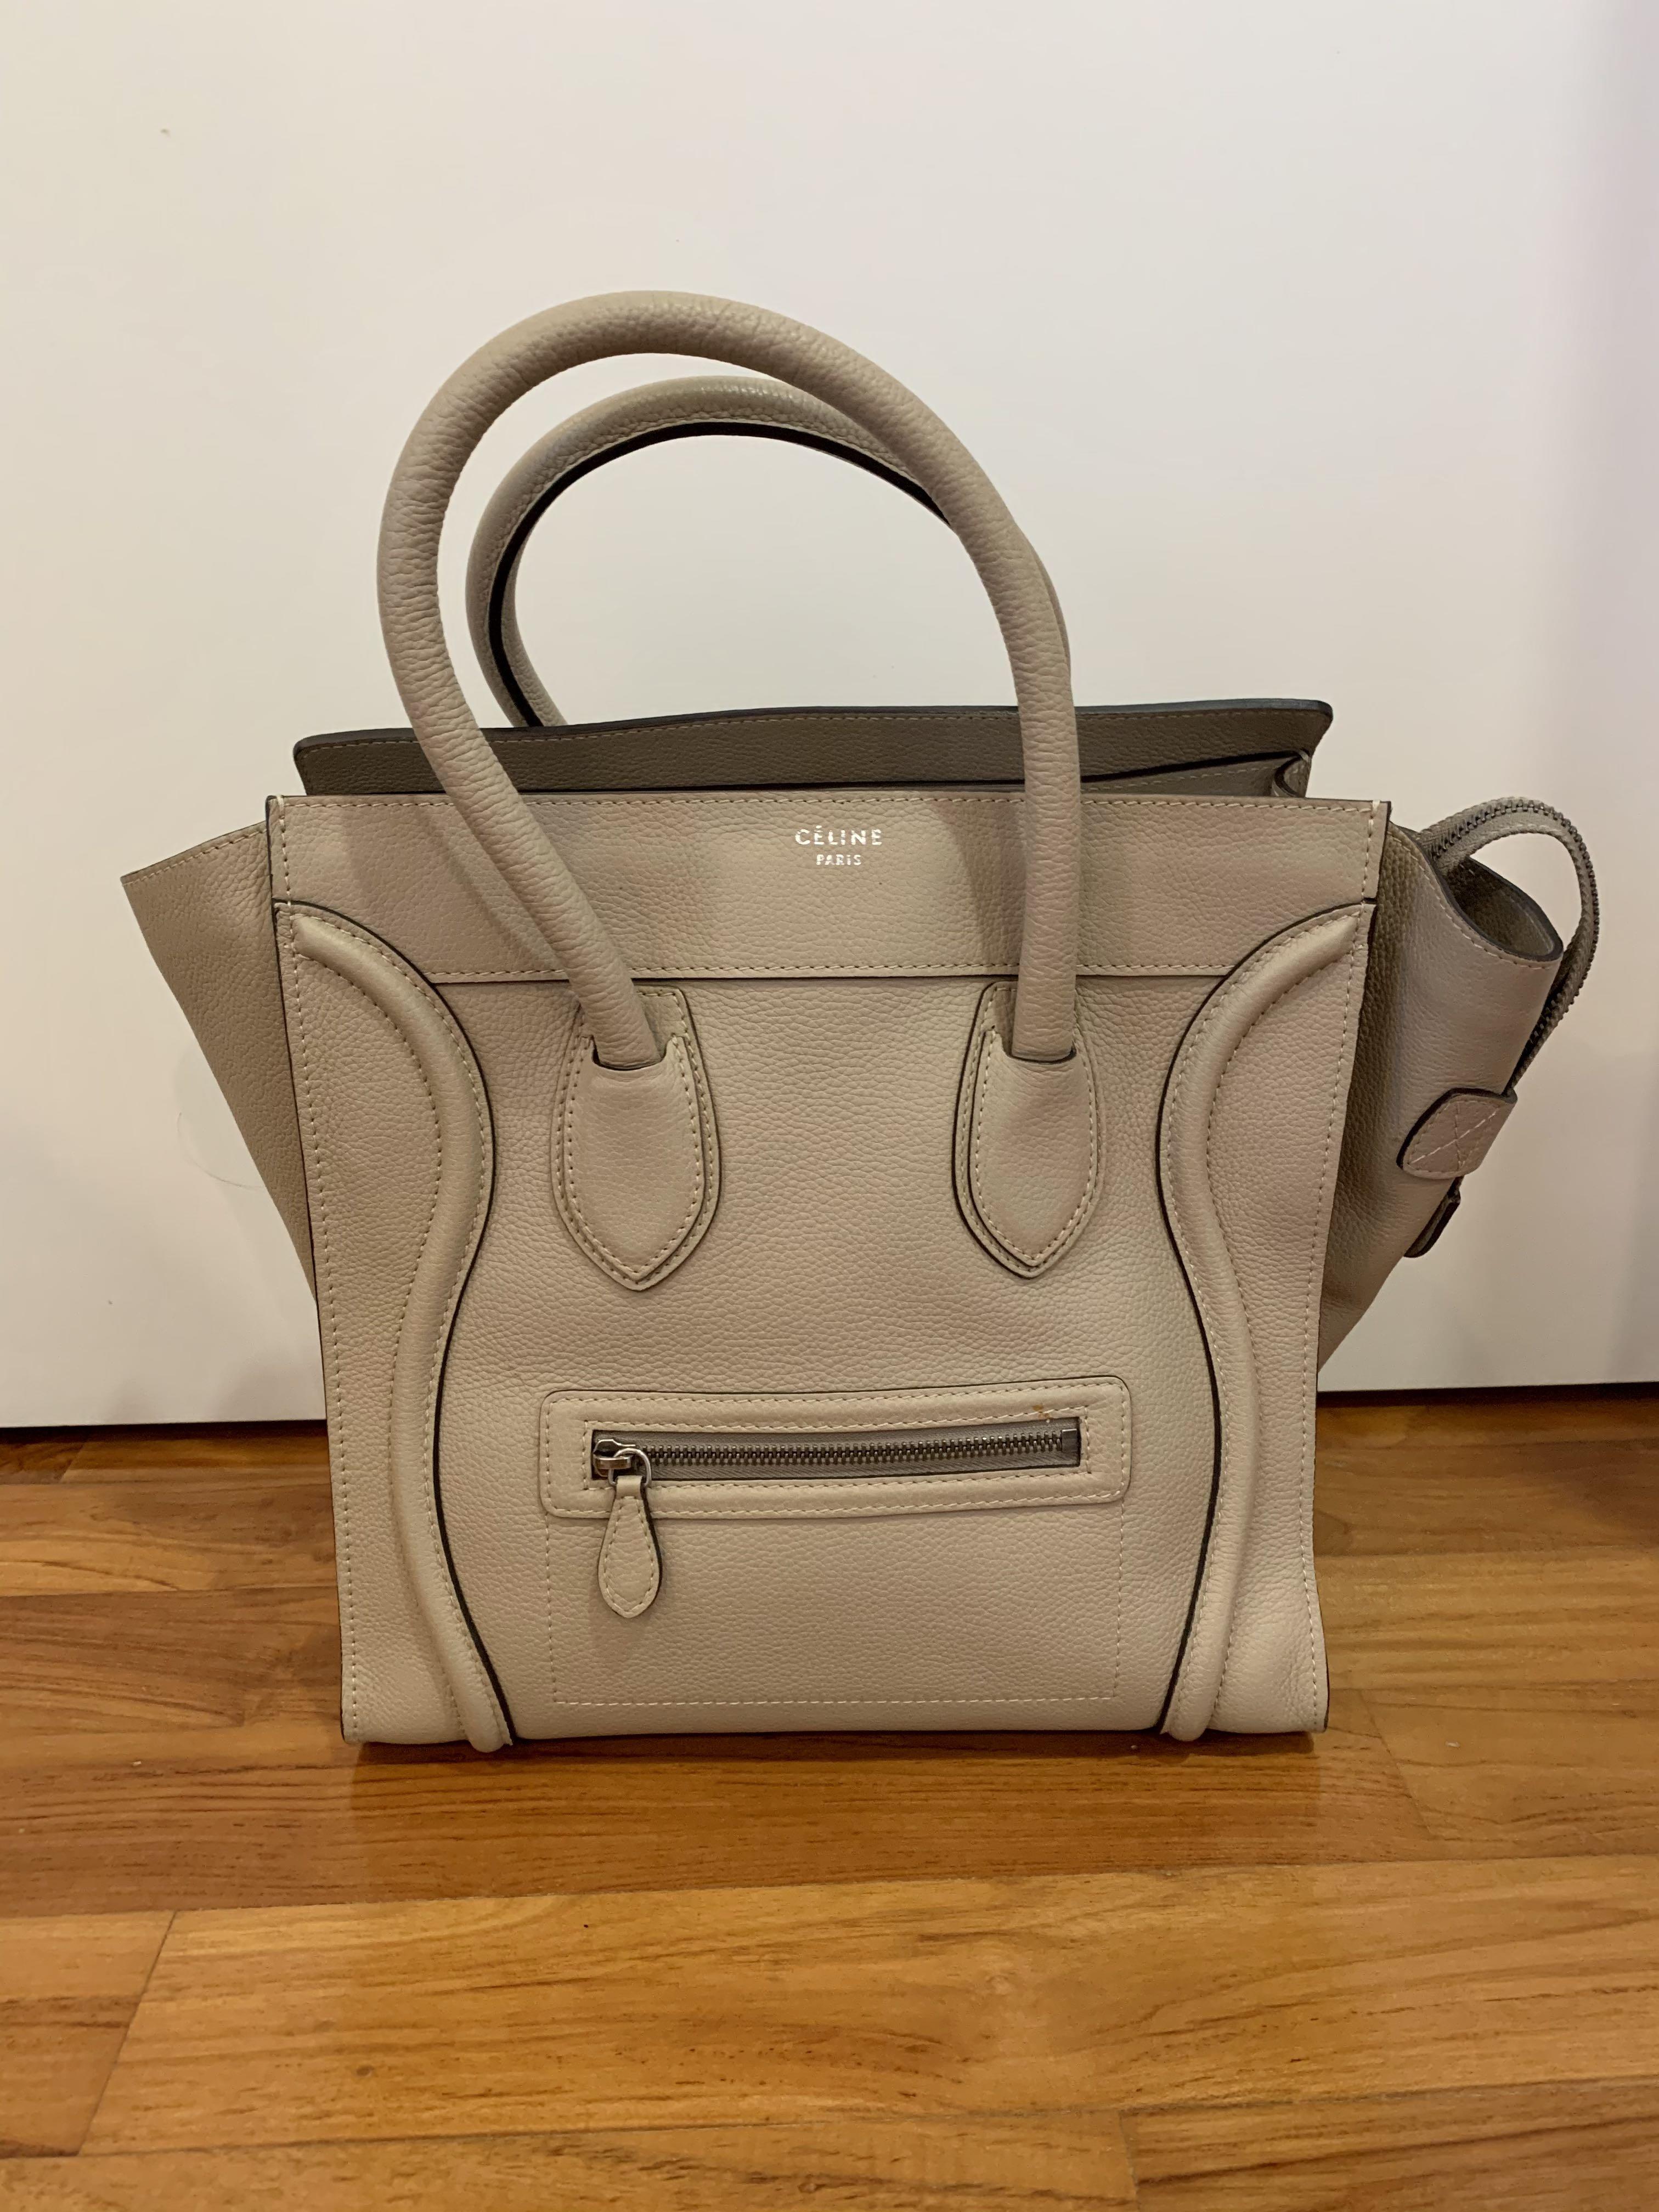 CELINE MICRO LUGGAGE TOTE  sharing indepth review after 3 years  mrsleyva  YouTube